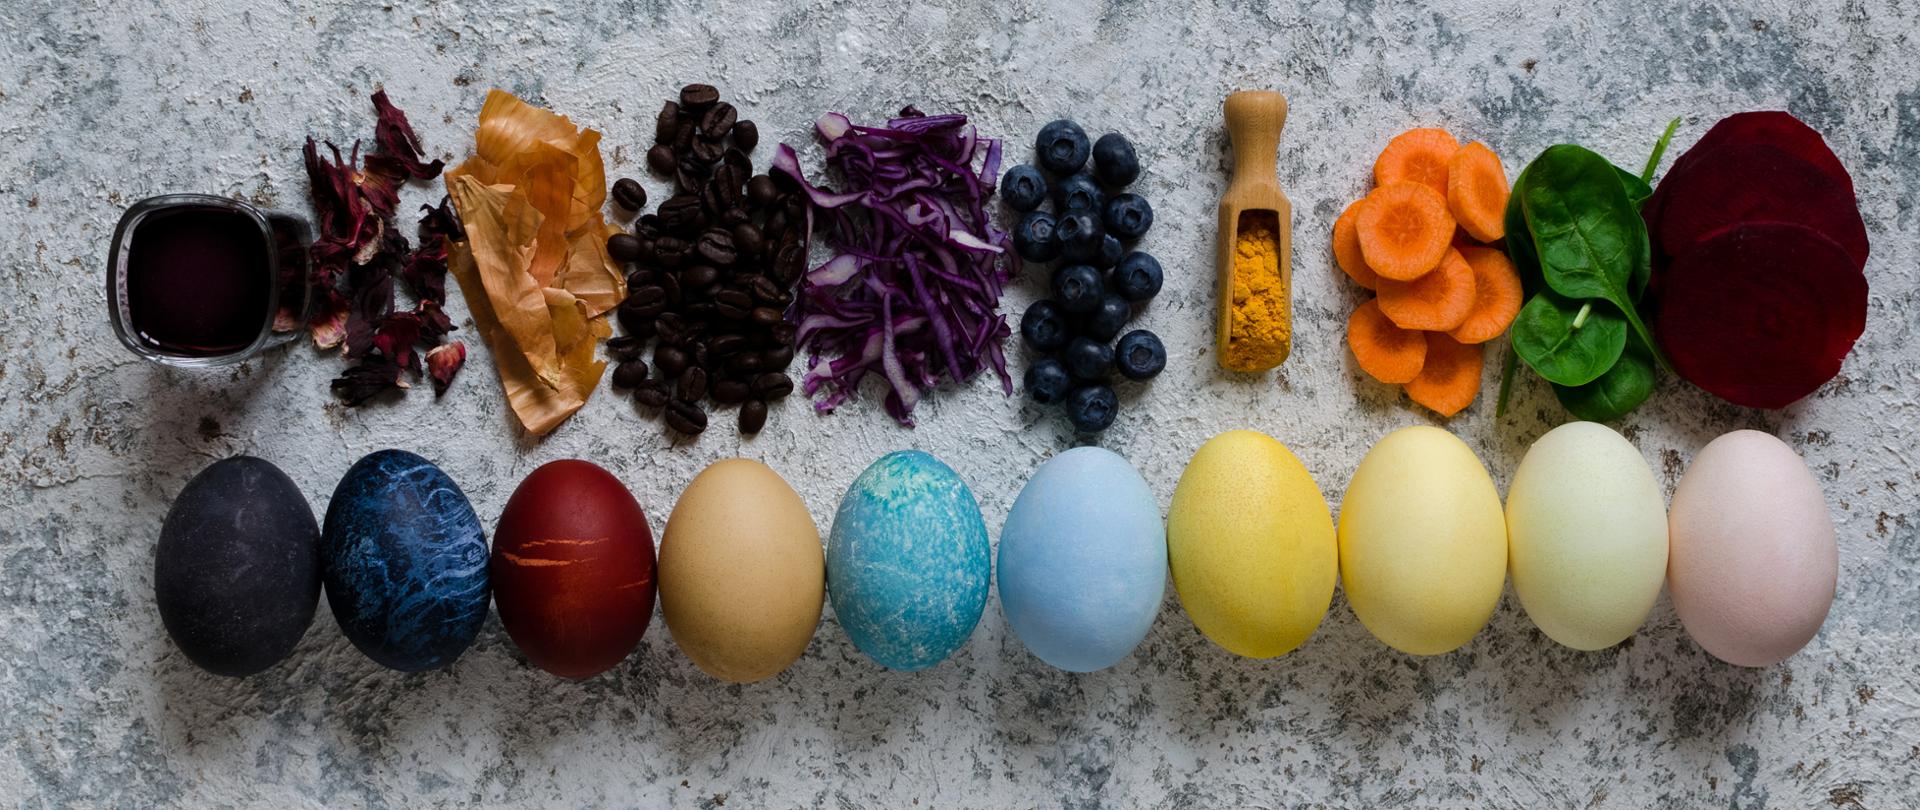 Easter eggs painted with natural egg dye from fruits and vegetables. Homemade naturally dyed Easter eggs with ingredients on concrete background. Copy space. Top view.